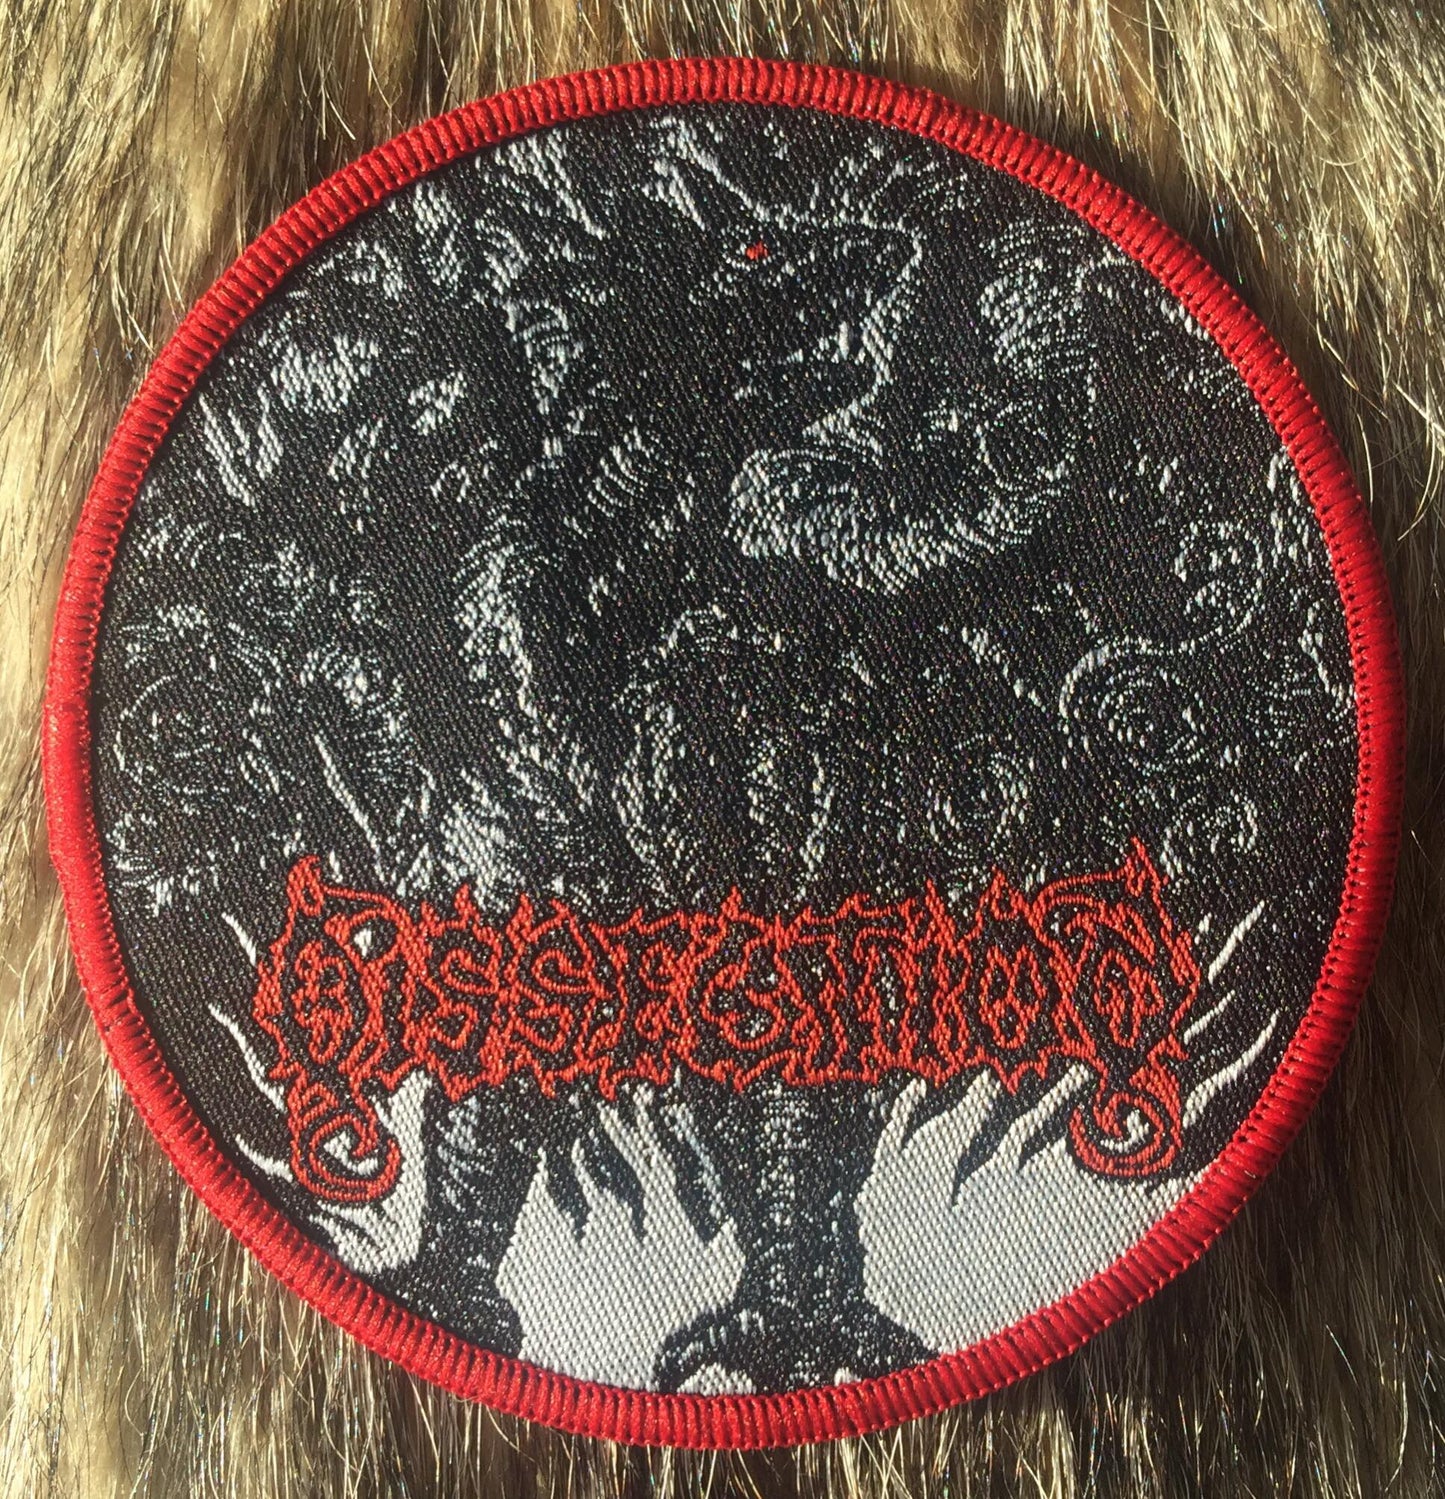 Dissection - Black Dragon Red Border Circular Patch